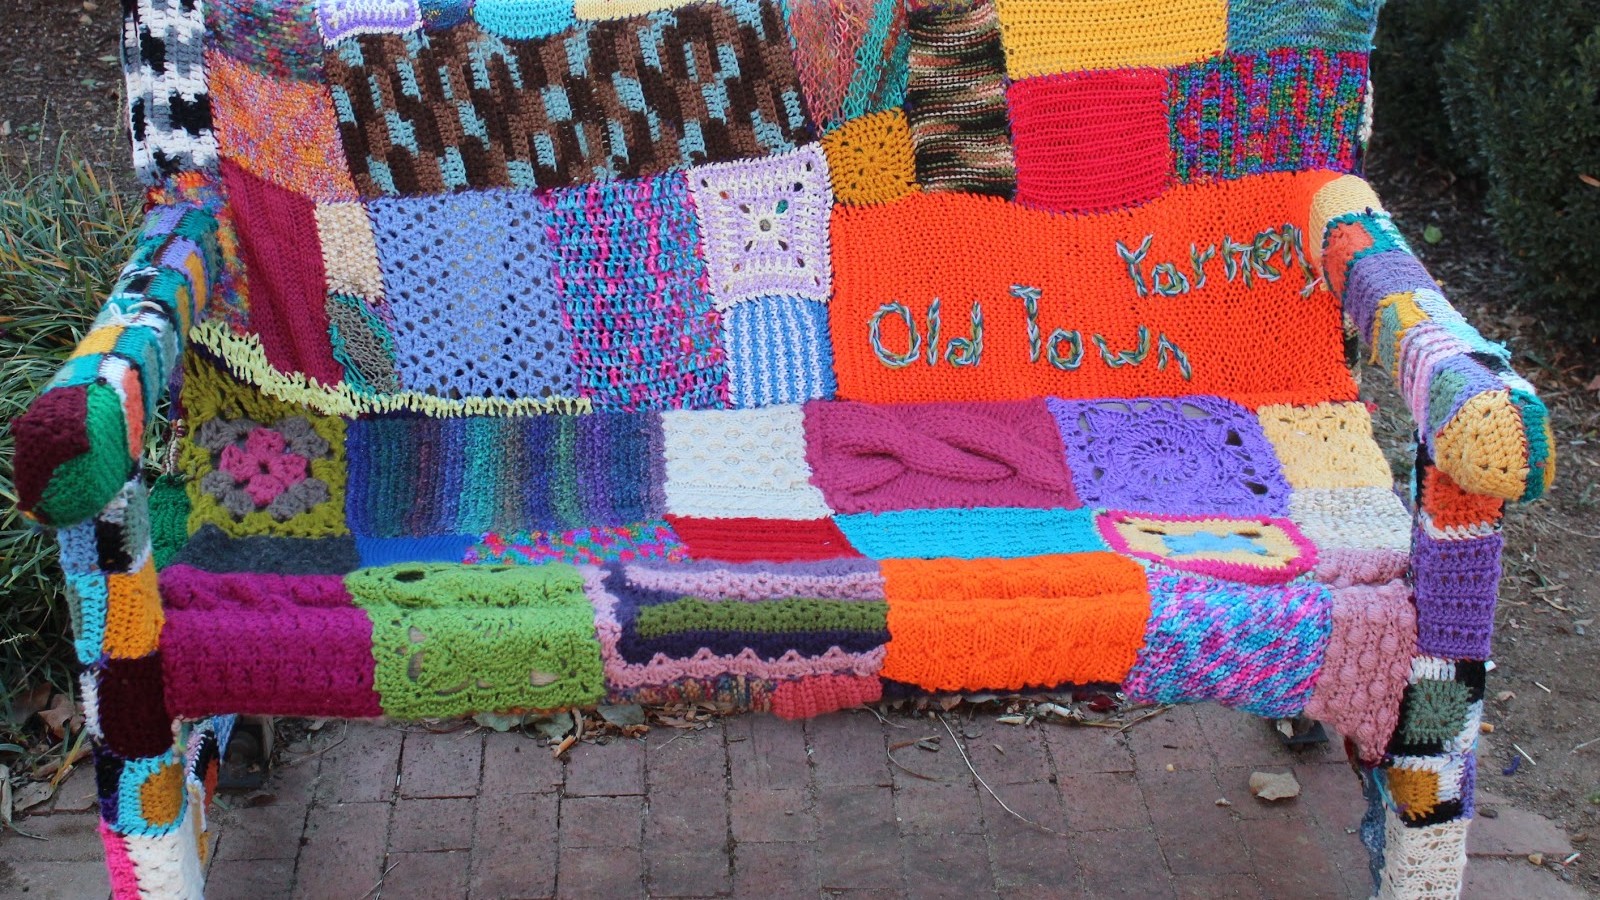 A bench is covered in a patchwork of bright and colourful knitting.